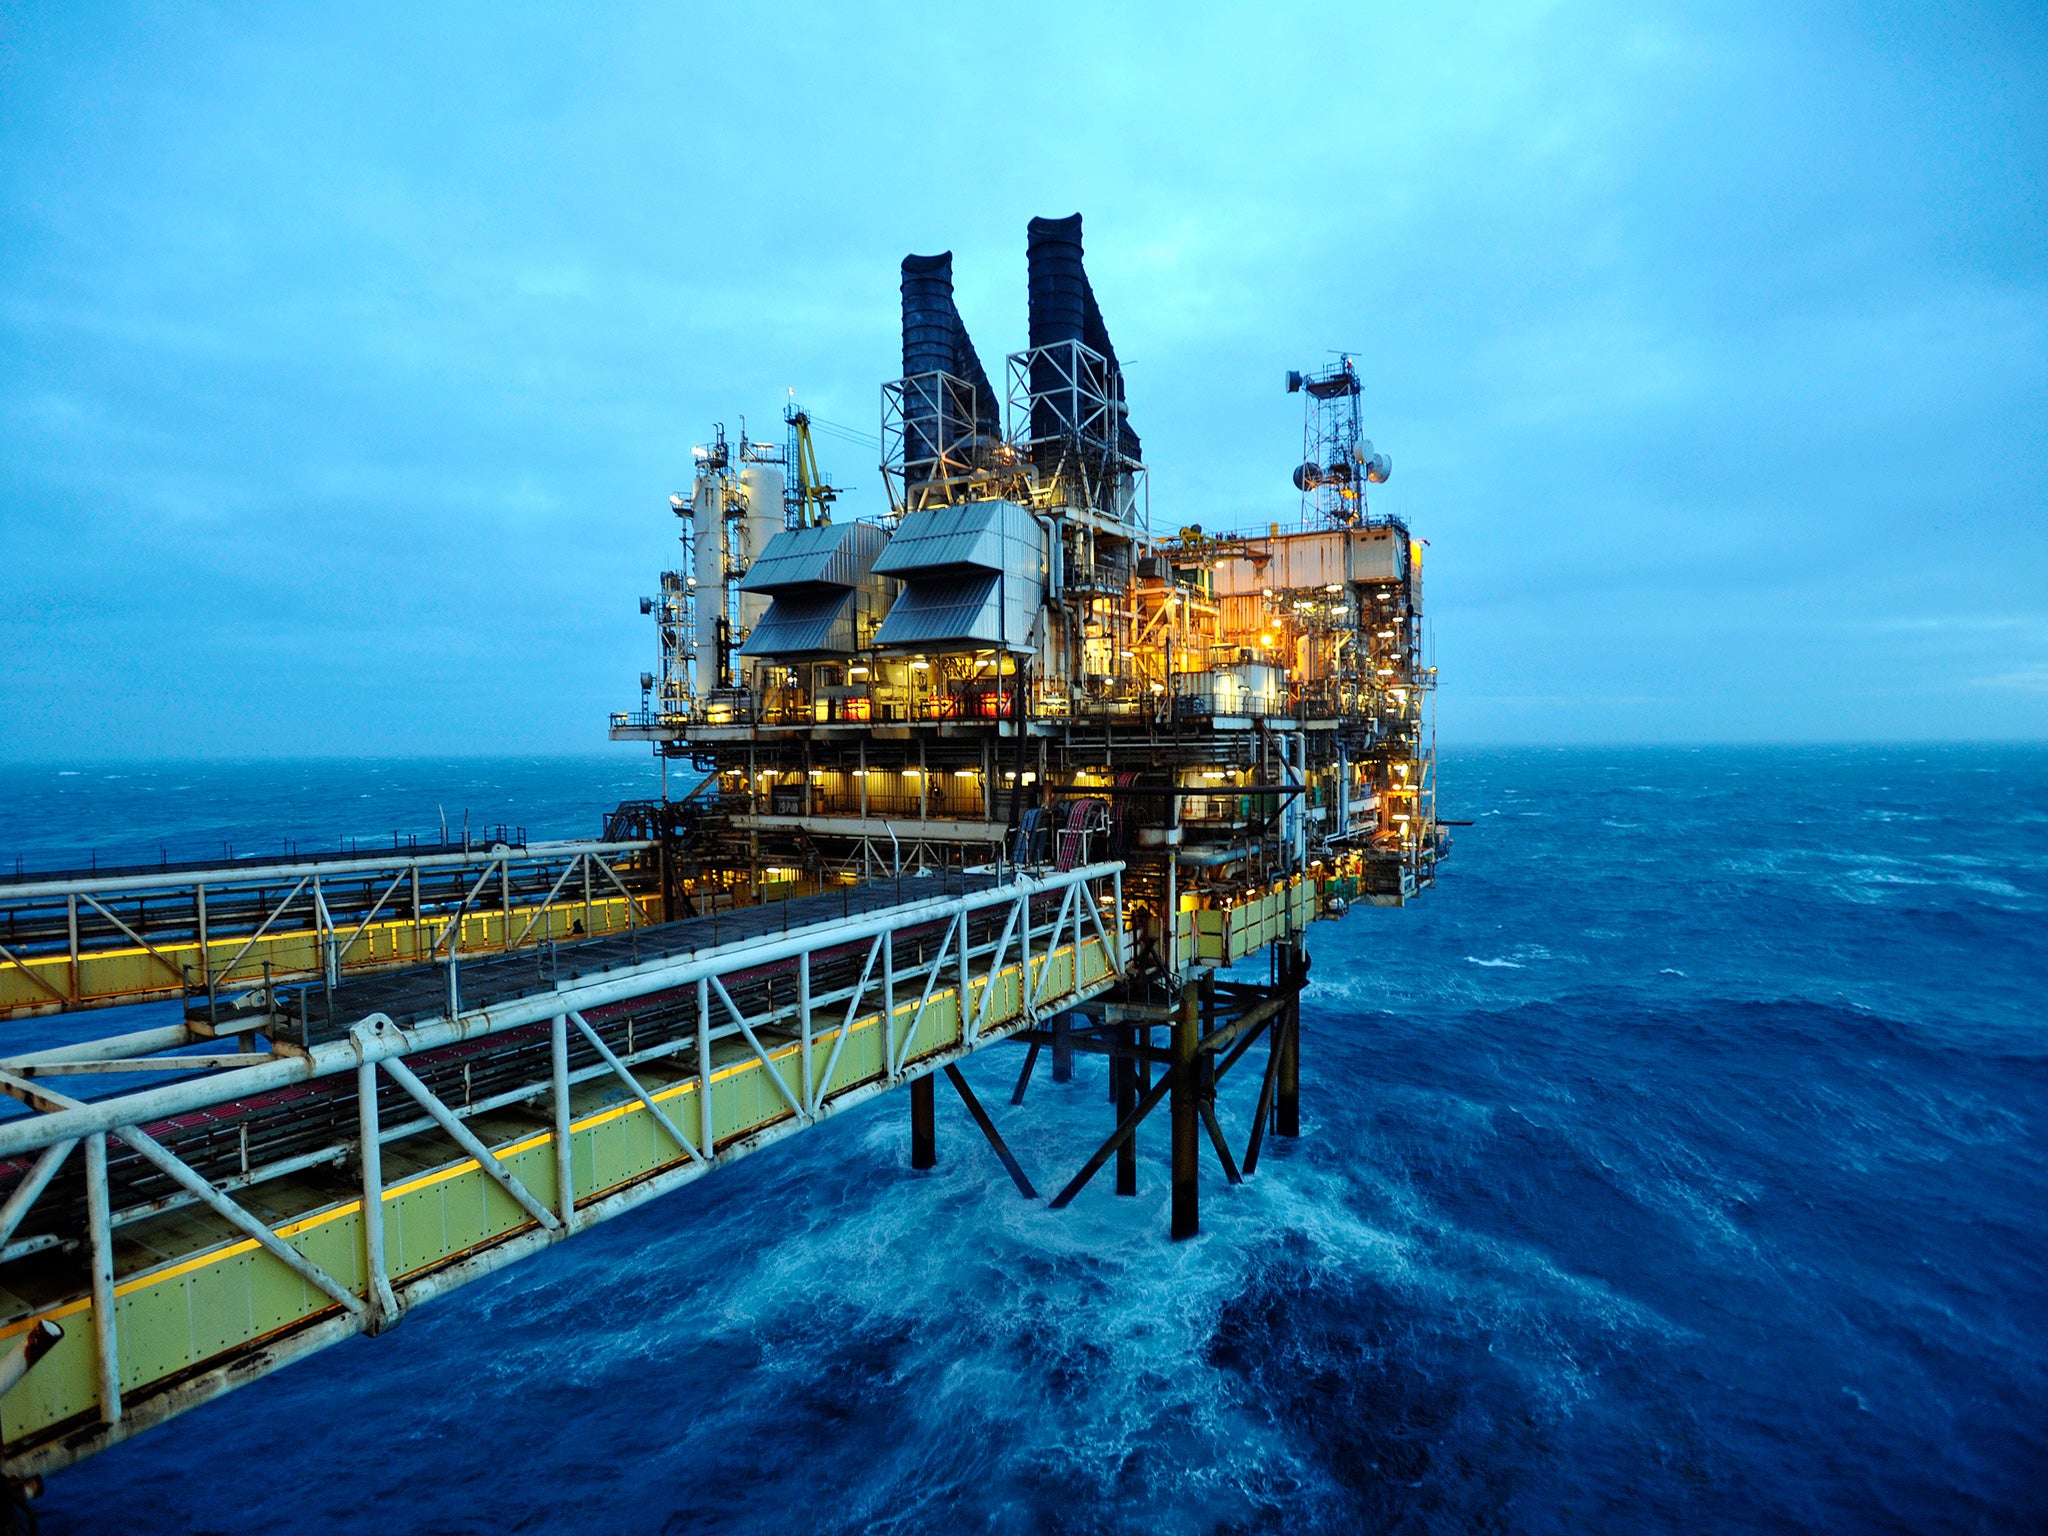 Tax on a typical North Sea oil field is now 50 per cent – as it was in 2010